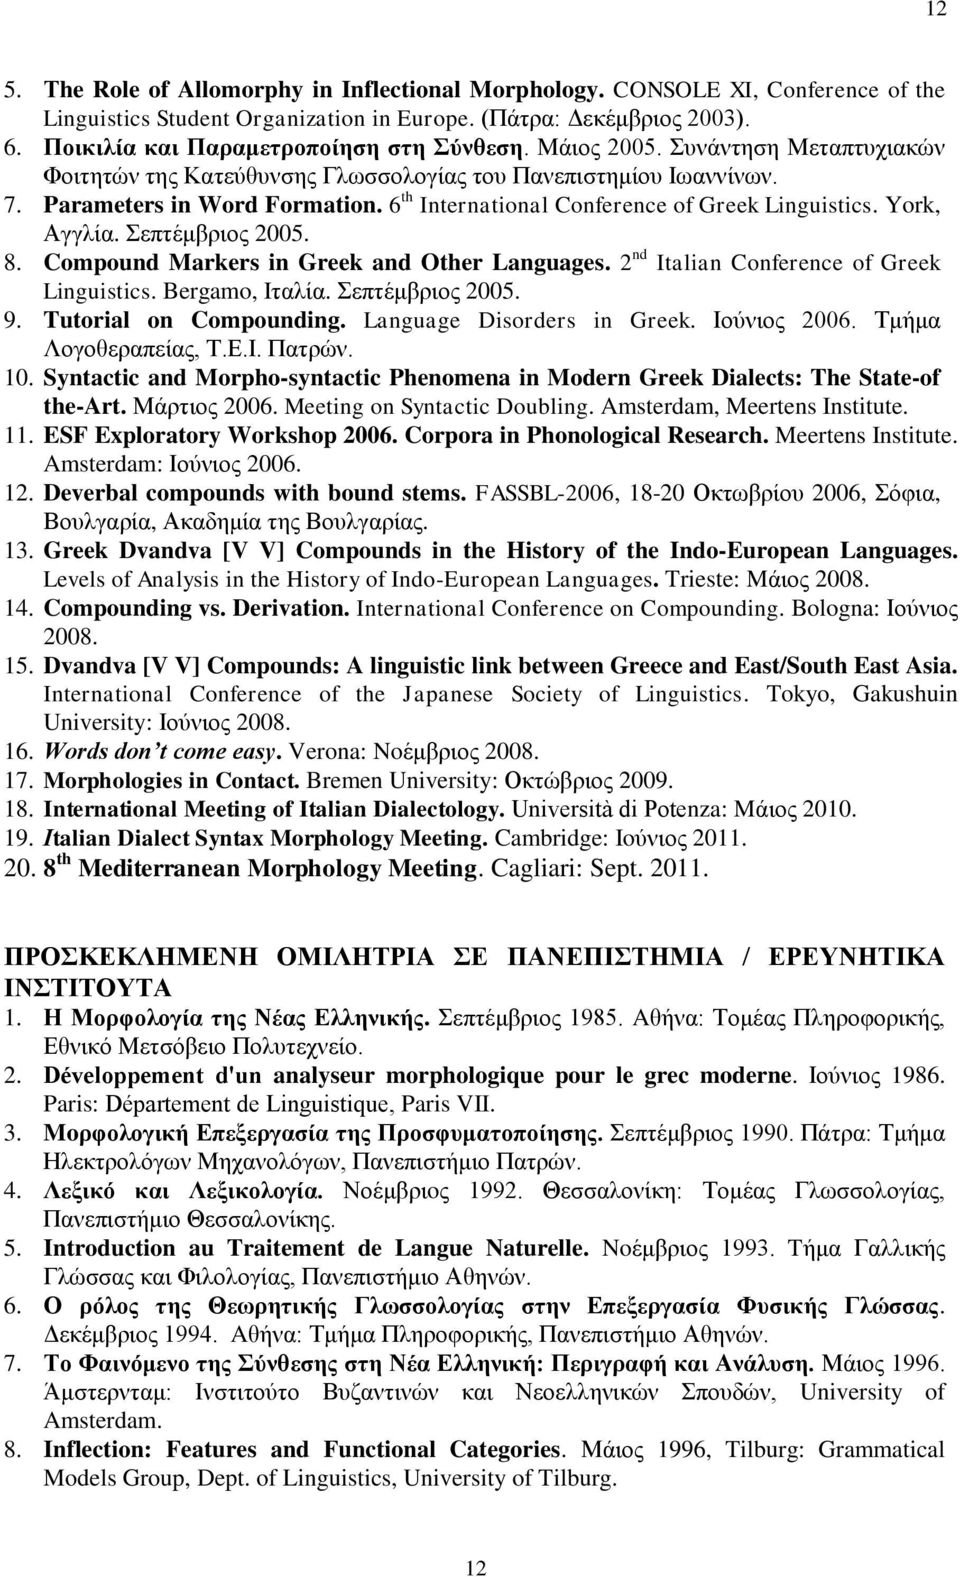 6 th International Conference of Greek Linguistics. York, Αγγλία. Σεπτέμβριος 2005. 8. Compound Markers in Greek and Other Languages. 2 nd Italian Conference of Greek Linguistics. Bergamo, Iταλία.